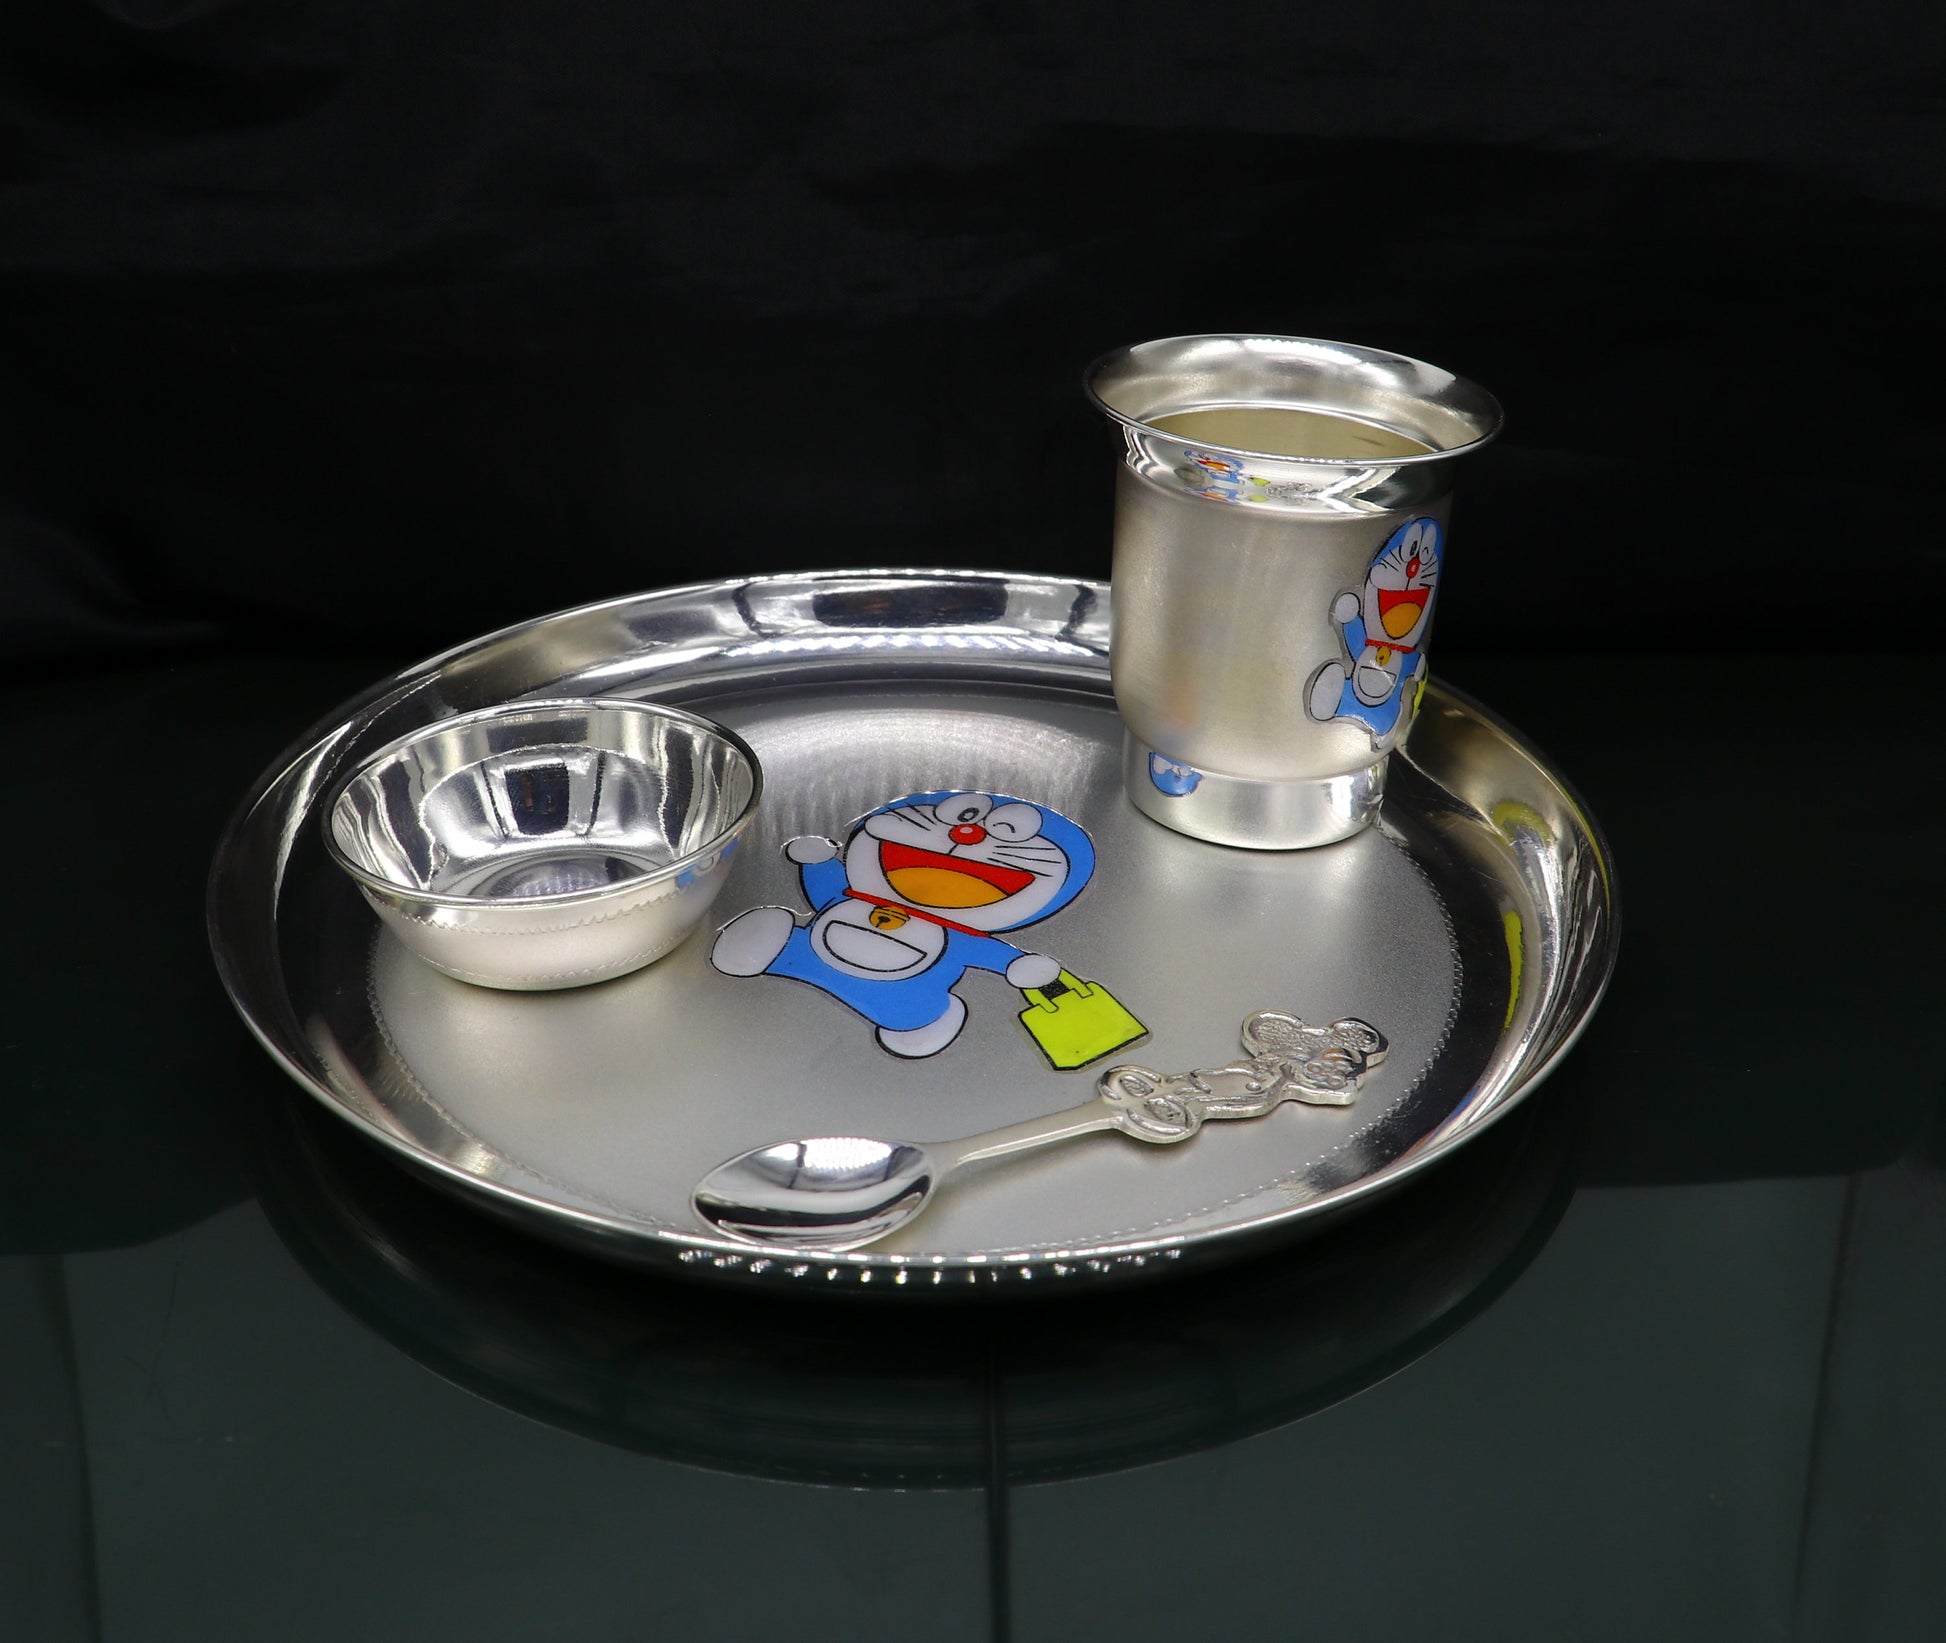 925 fine silver combo bowl, spoon ,Water/milk tumbler and plate/tray, silver baby dinner set utensils, best gifting utensils ideas sv131 - TRIBAL ORNAMENTS